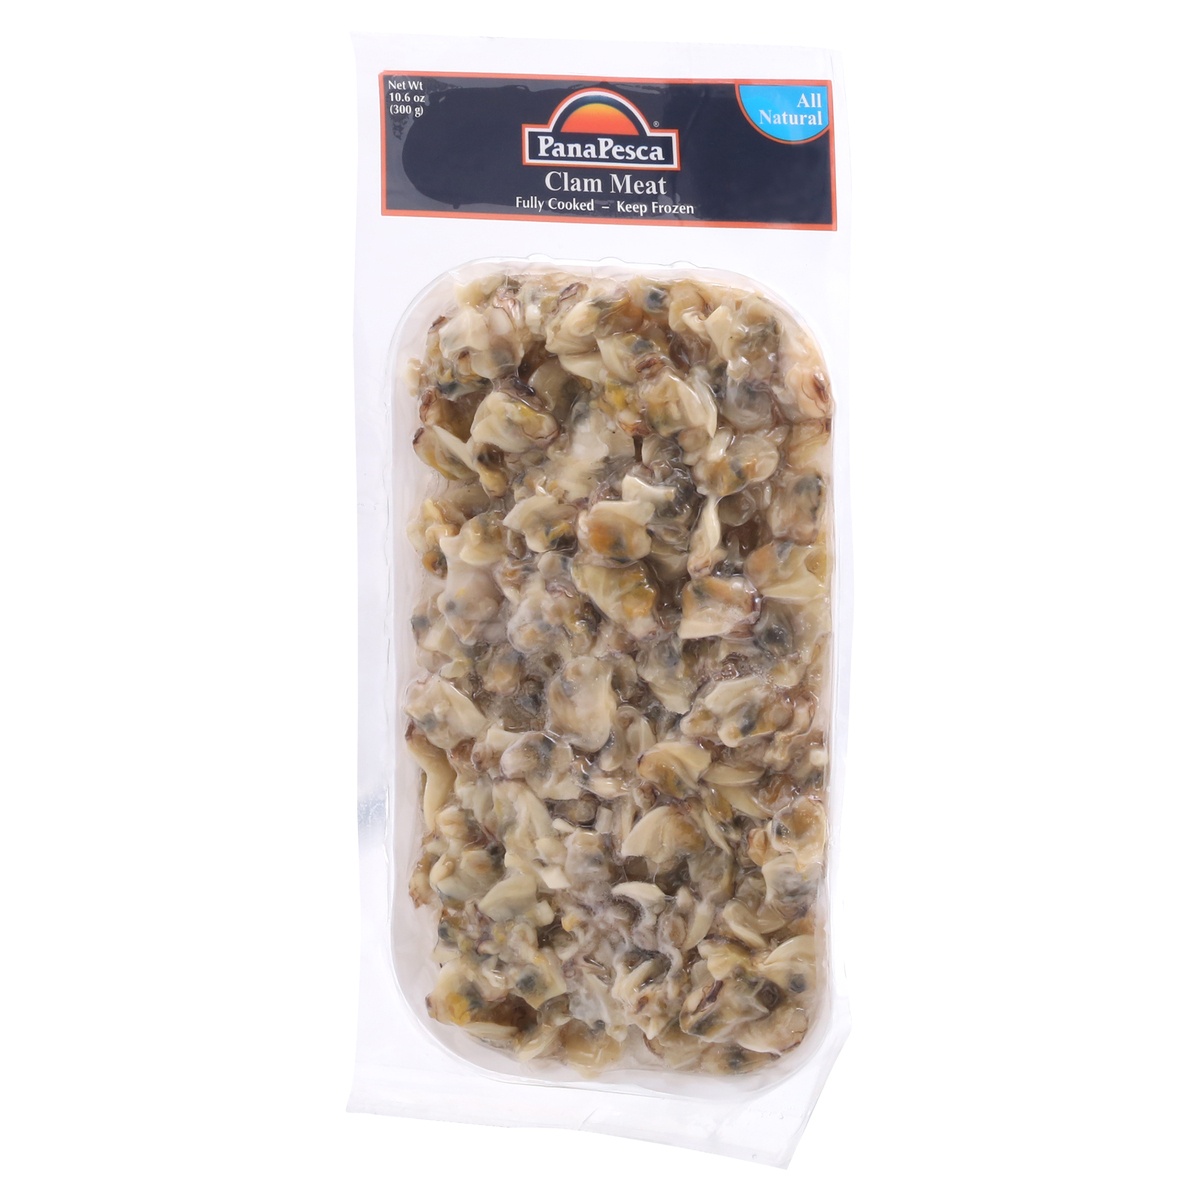 slide 3 of 9, PanaPesca Pana Pesca Clam Meat Skin Pack, 10.6 oz